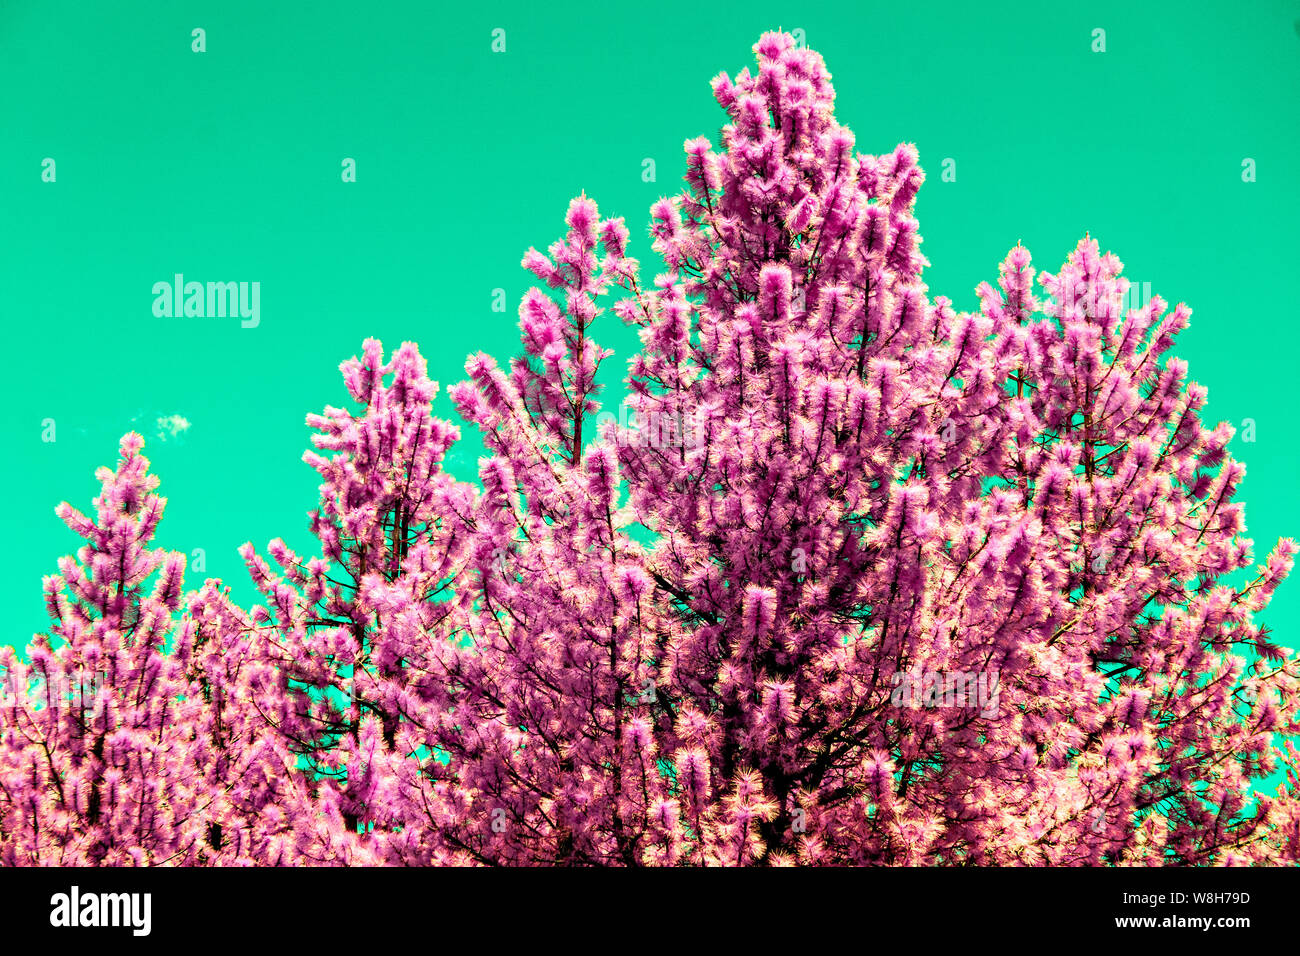 Pink pine tree against turquoise sky. Stock Photo